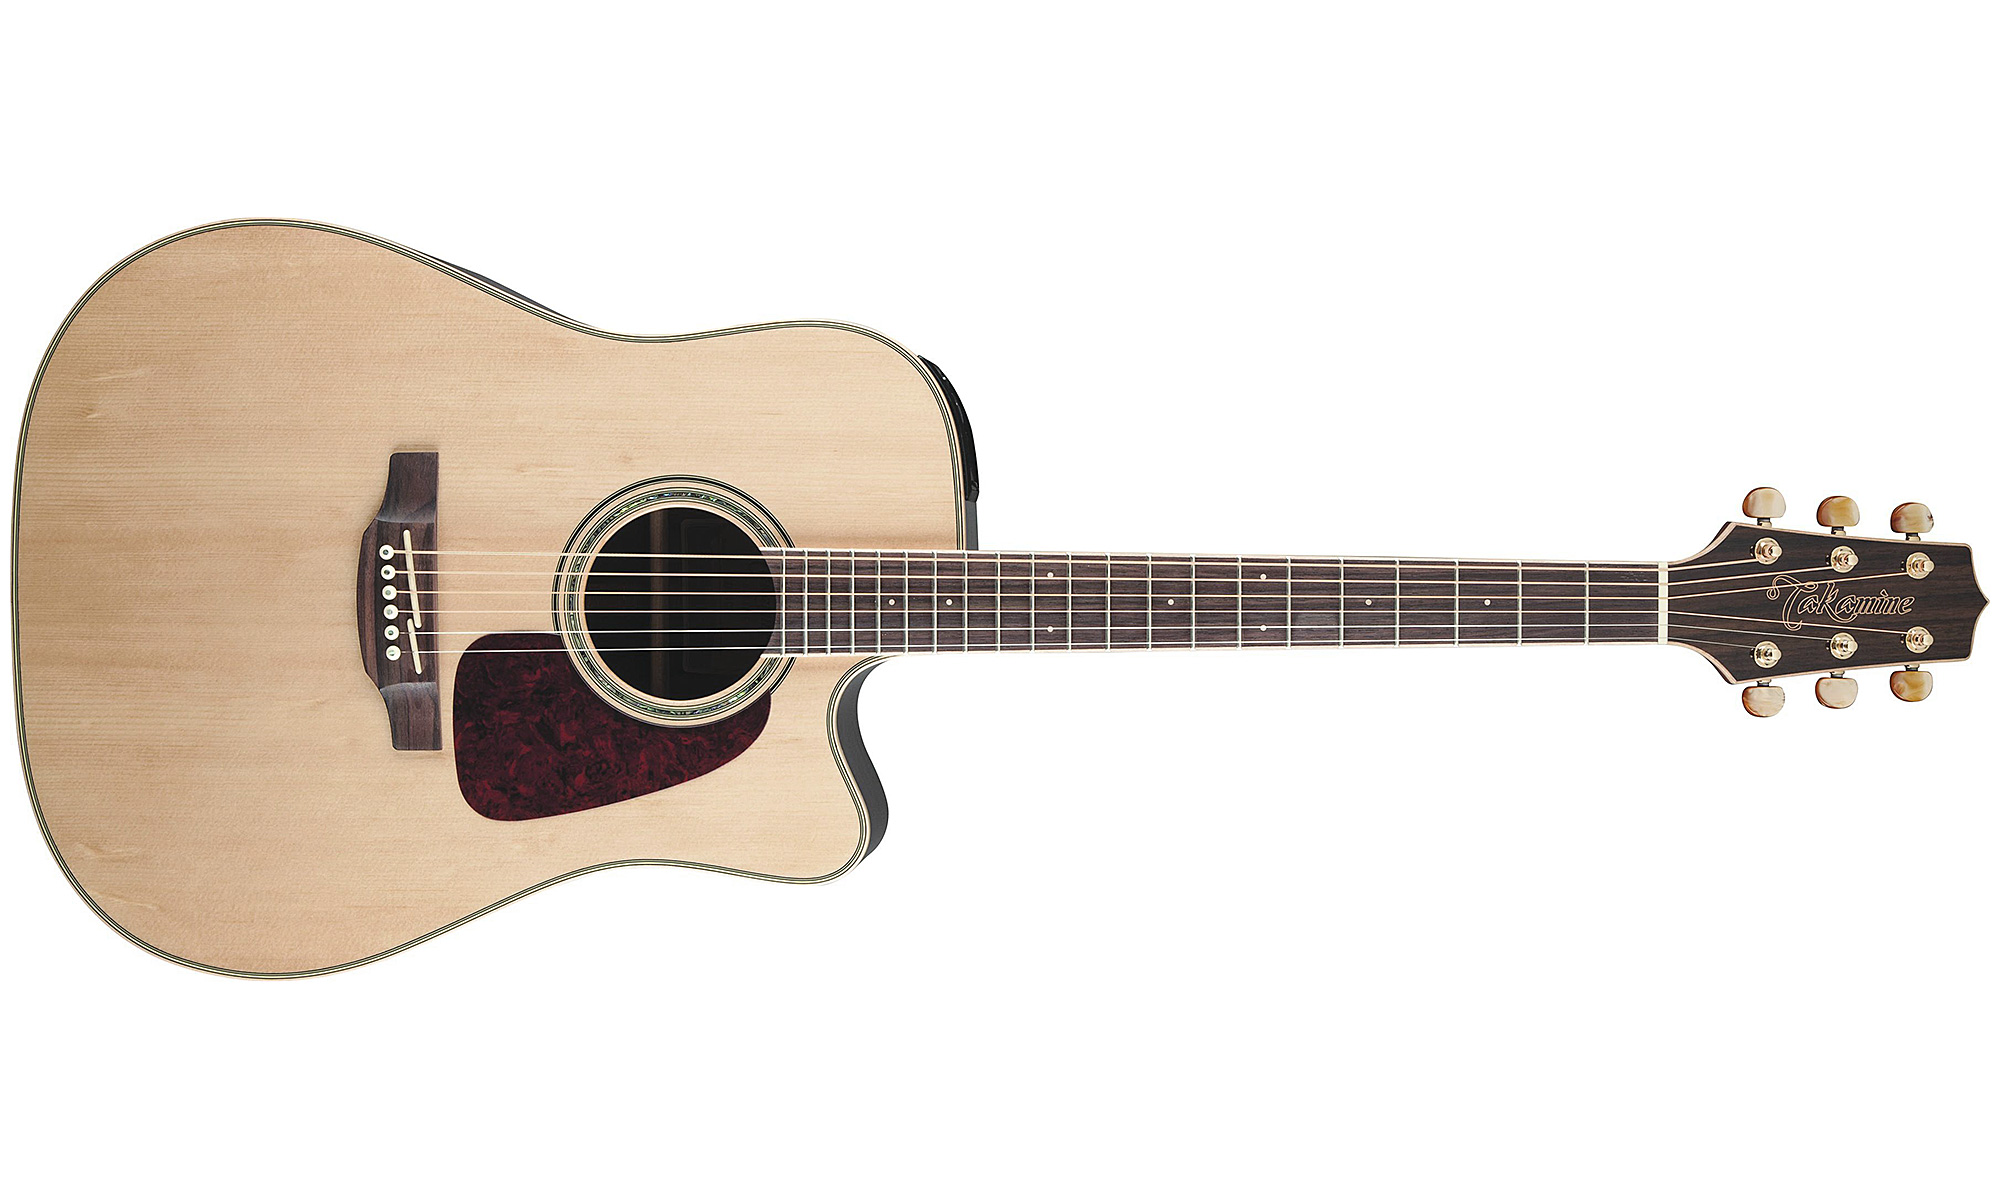 Takamine Gd71ce-nat Dreadnought Cw Epicea Palissandre - Natural Gloss - Guitare Electro Acoustique - Variation 4